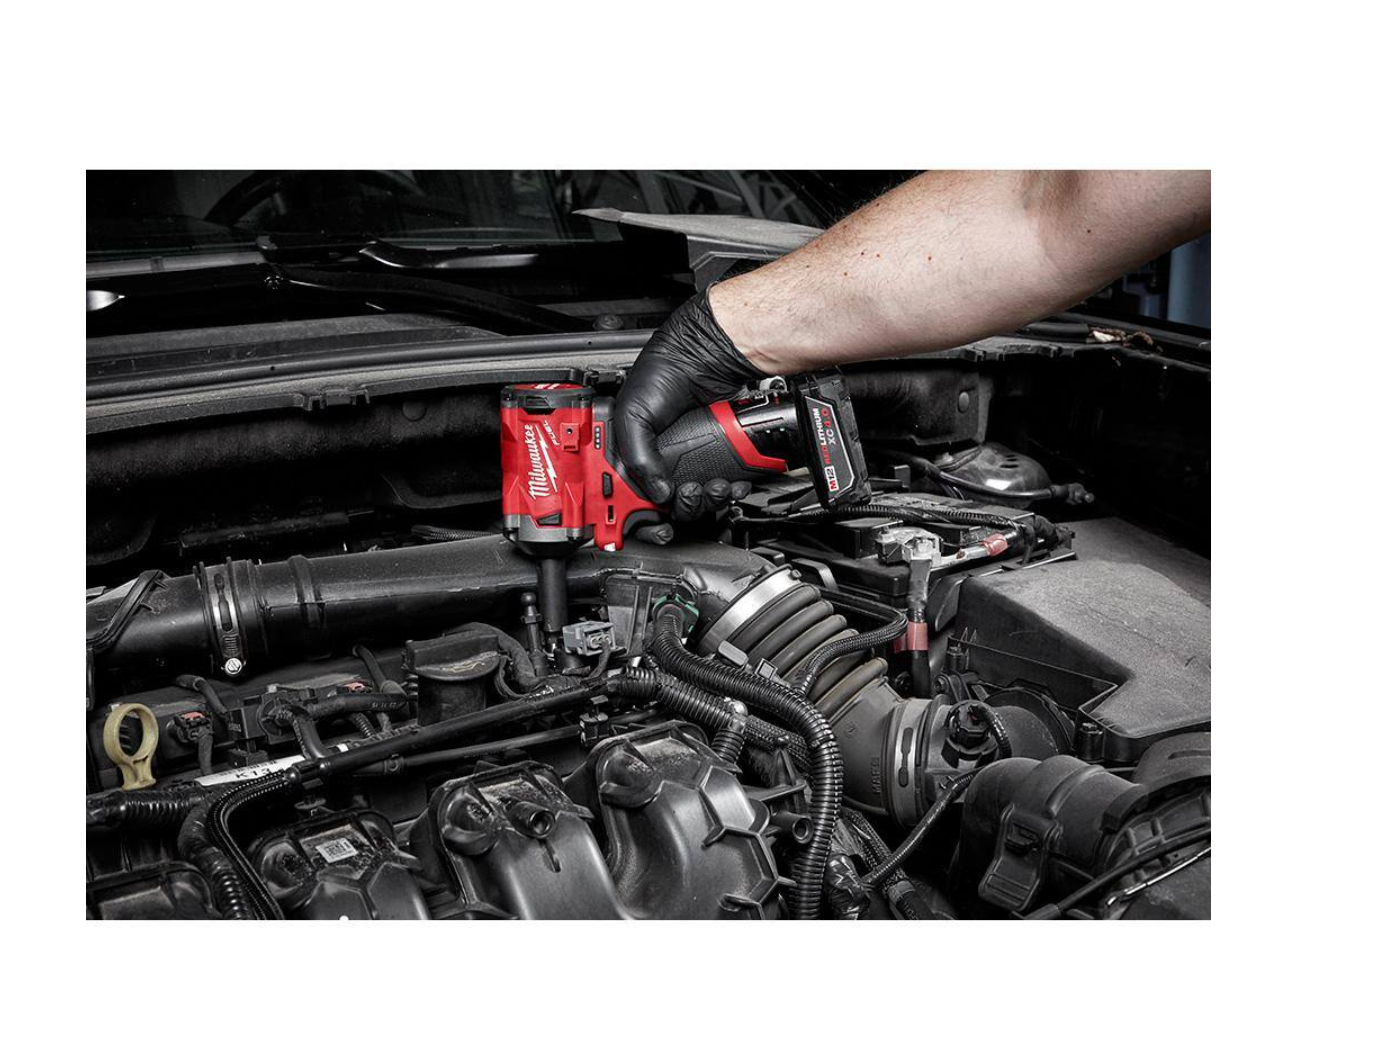 Milwaukee 2554-20-2485-20-48-59-2440 M12 FUEL 12V Lithium-Ion Brushless Cordless Stubby 3/8 in. Impact Wrench and 1/4 in. Die Grinder Kit (2-Tool)